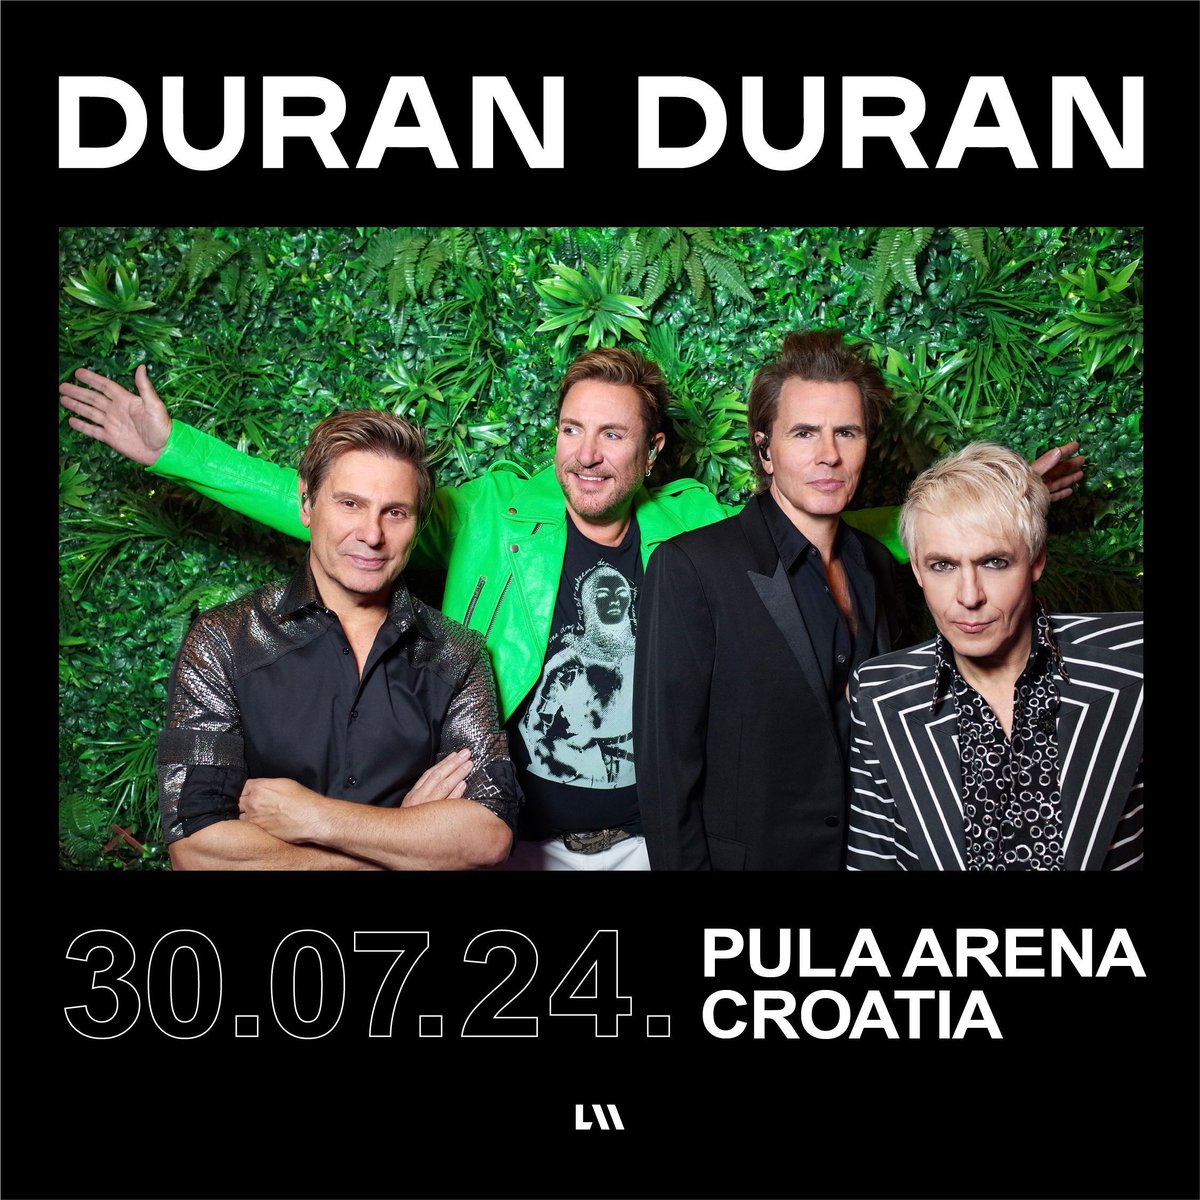 Just announced - Duran Duran at Pula Arena in Pula, Croatia on July 30 - their 1st time back since 2017

VIP Members visit duranduran.com/members for pre-sale; General on sale Feb. 2 at 10am local time via Eventim - visit duranduran.com for more details. 

#duranlive